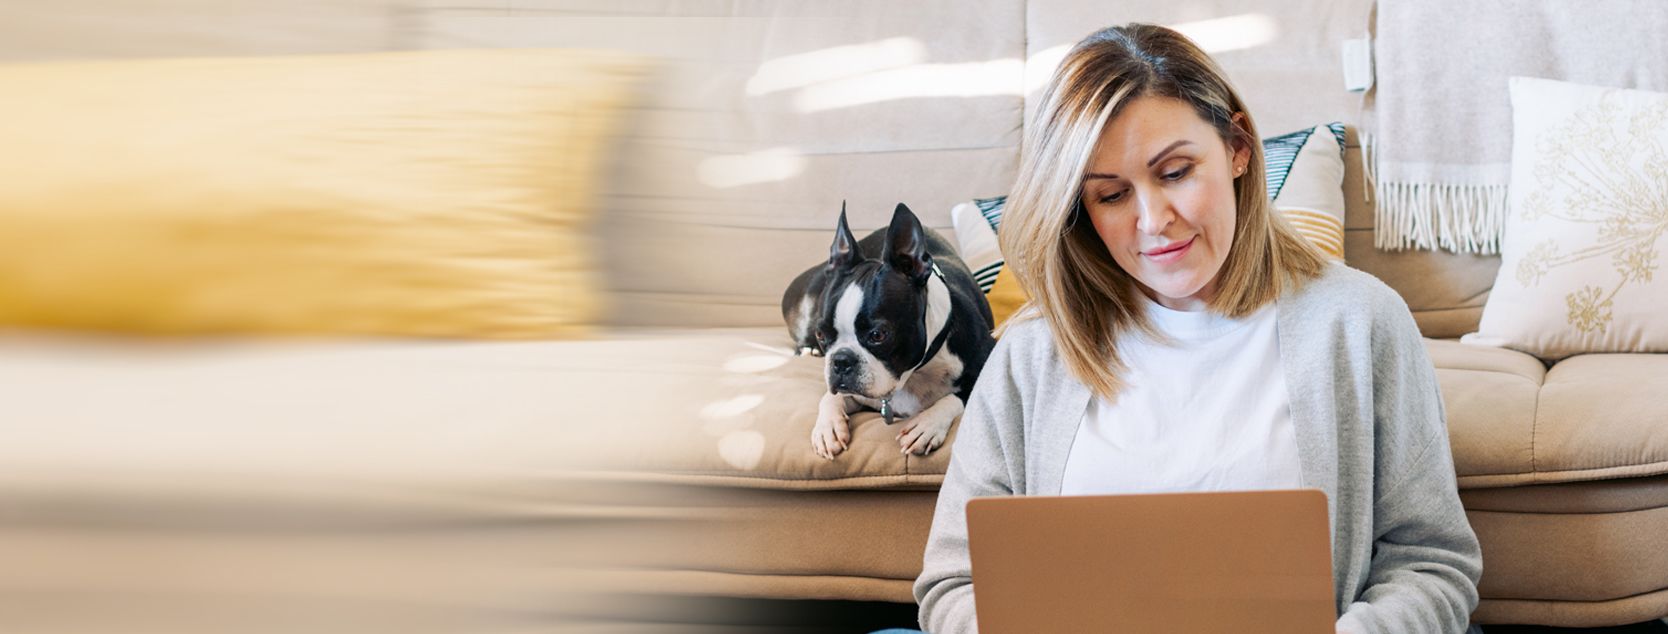 A woman manages her bank accounts from her laptop as her dog watches on